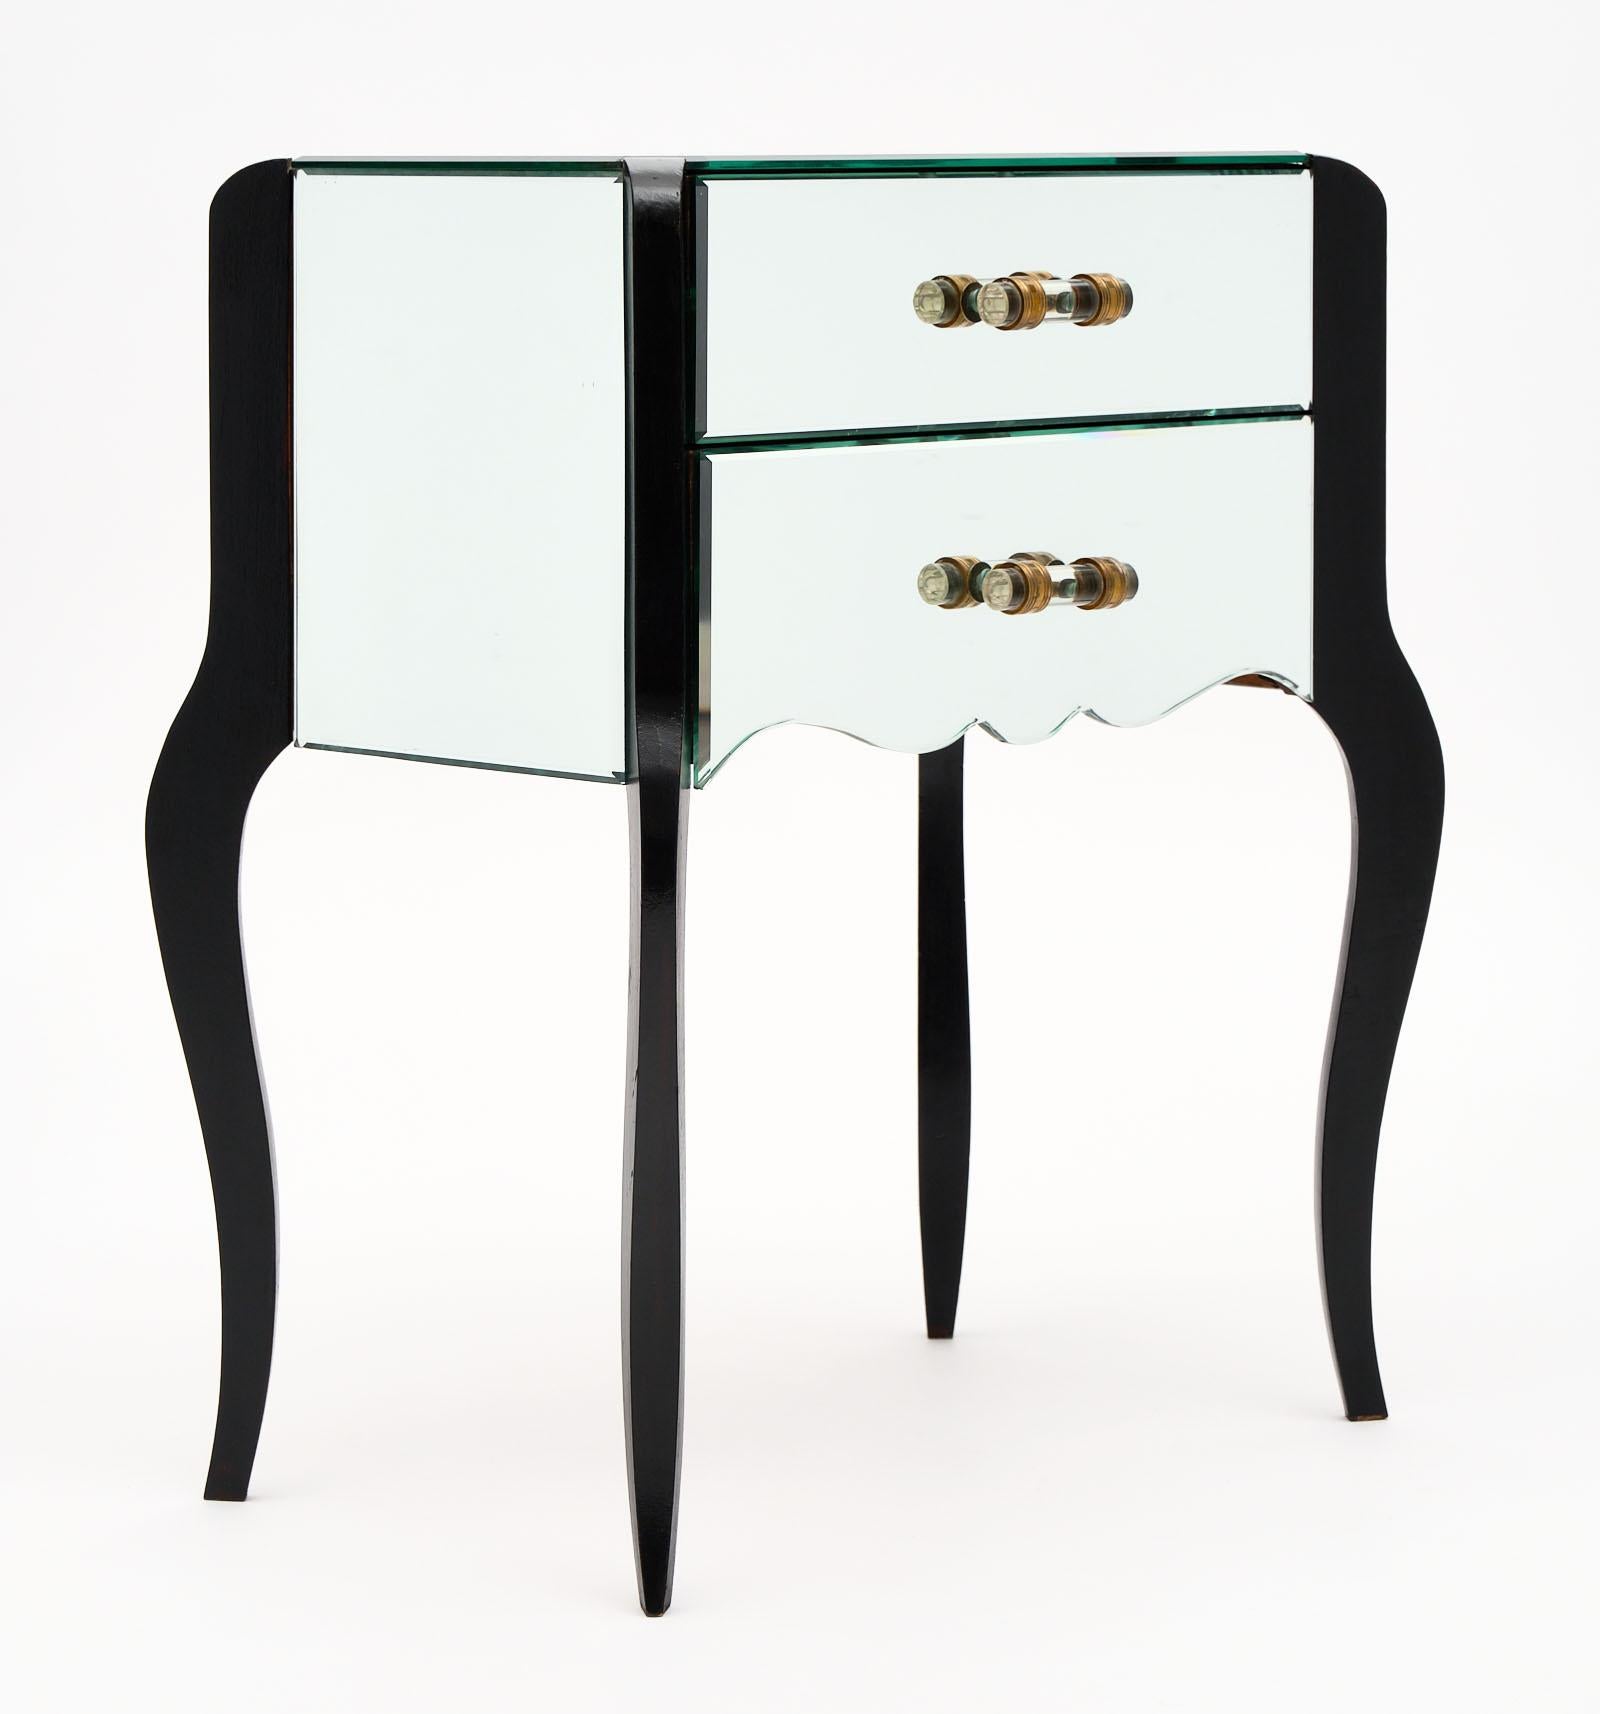 Mid-20th Century Art Deco Period French Mirrored Side Tables